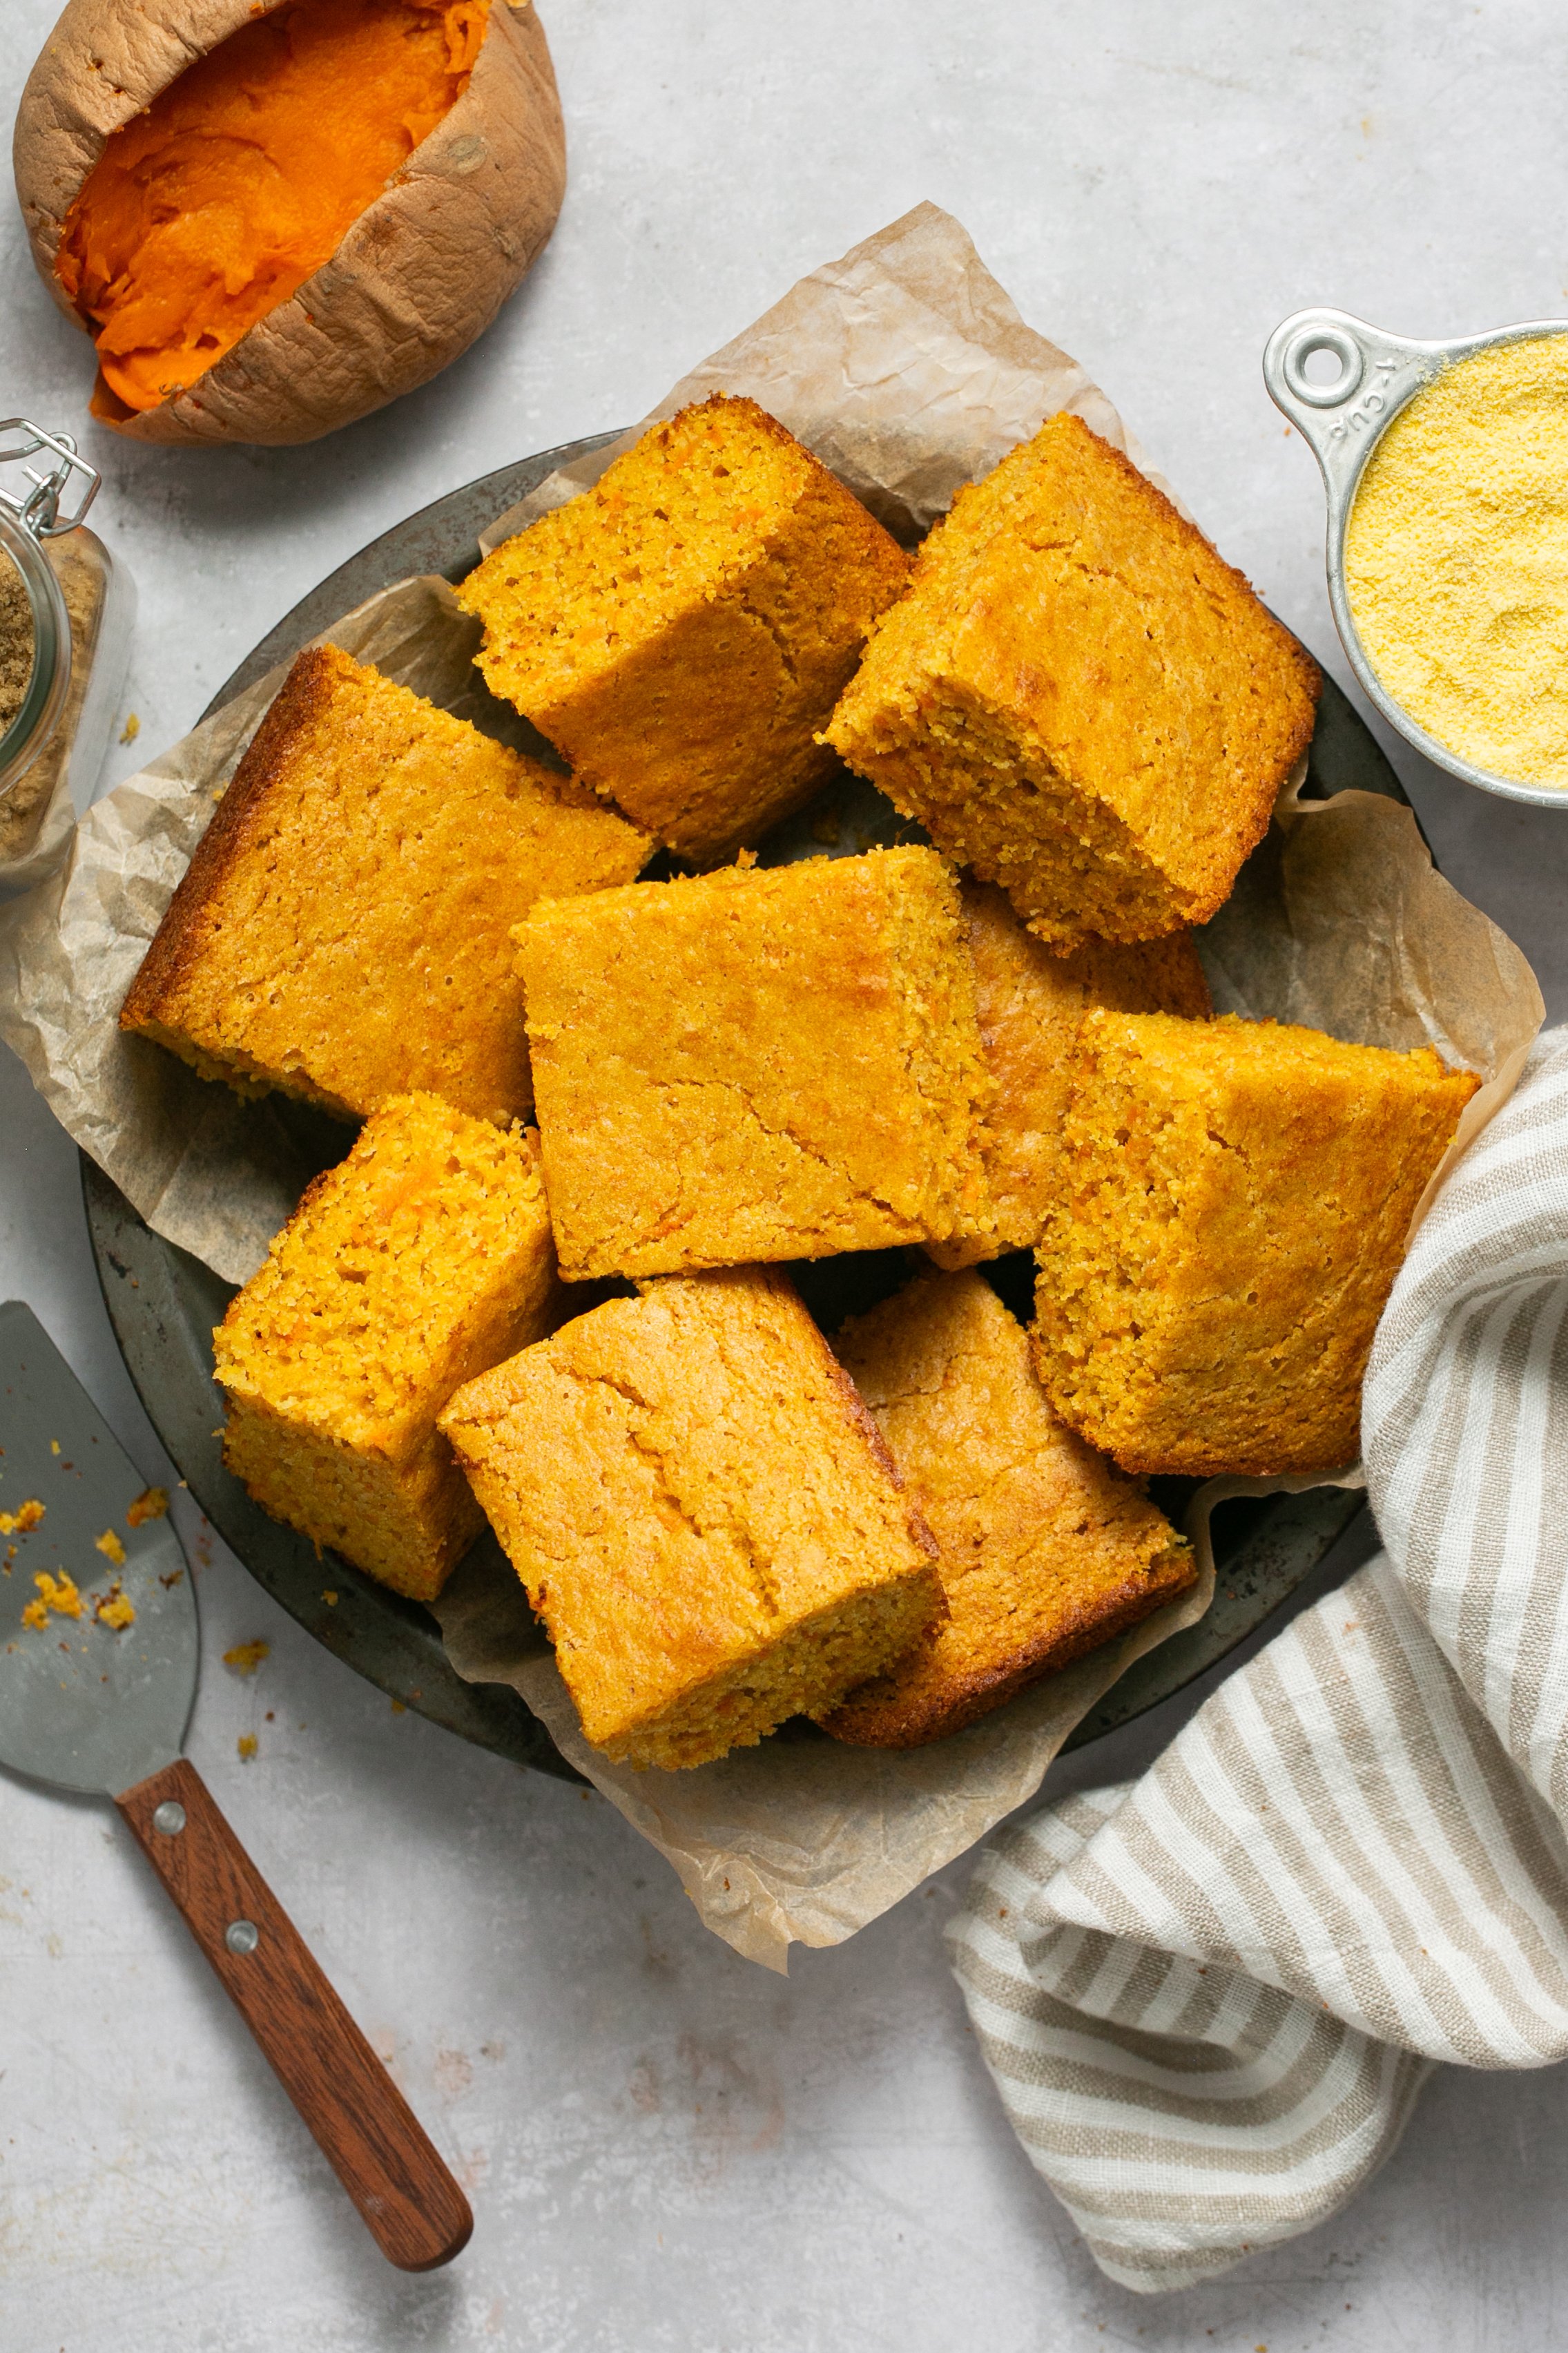 Cut pieces of sweet potato cornbread in a baking dish lined with parchment paper on a white table. There is a measuring cup filled with cornmeal, a cooked sweet potato, a beige and white linen napkin, and a serving spatula set off to the side on the table as well.